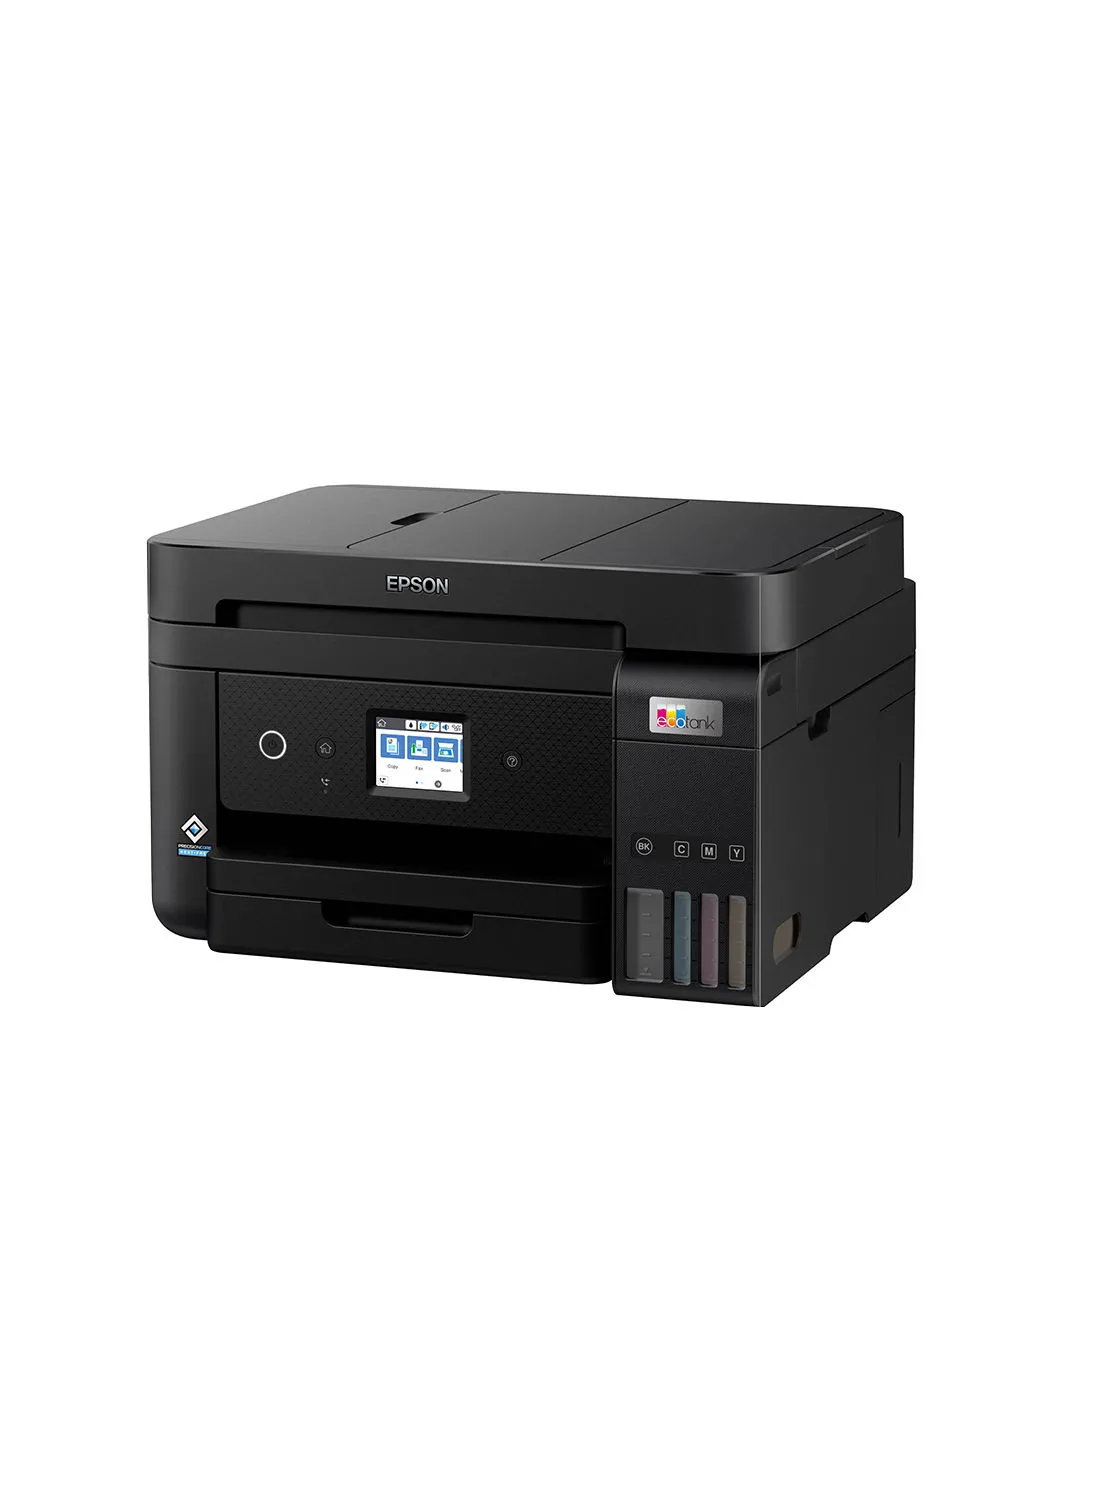 EPSON Ecotank L6290 Office Ink Tank Printer A4 Colour 4-In-1 Printer With ADF, Wi-Fi And Smart Panel Connectivity And Lcd Screen Black